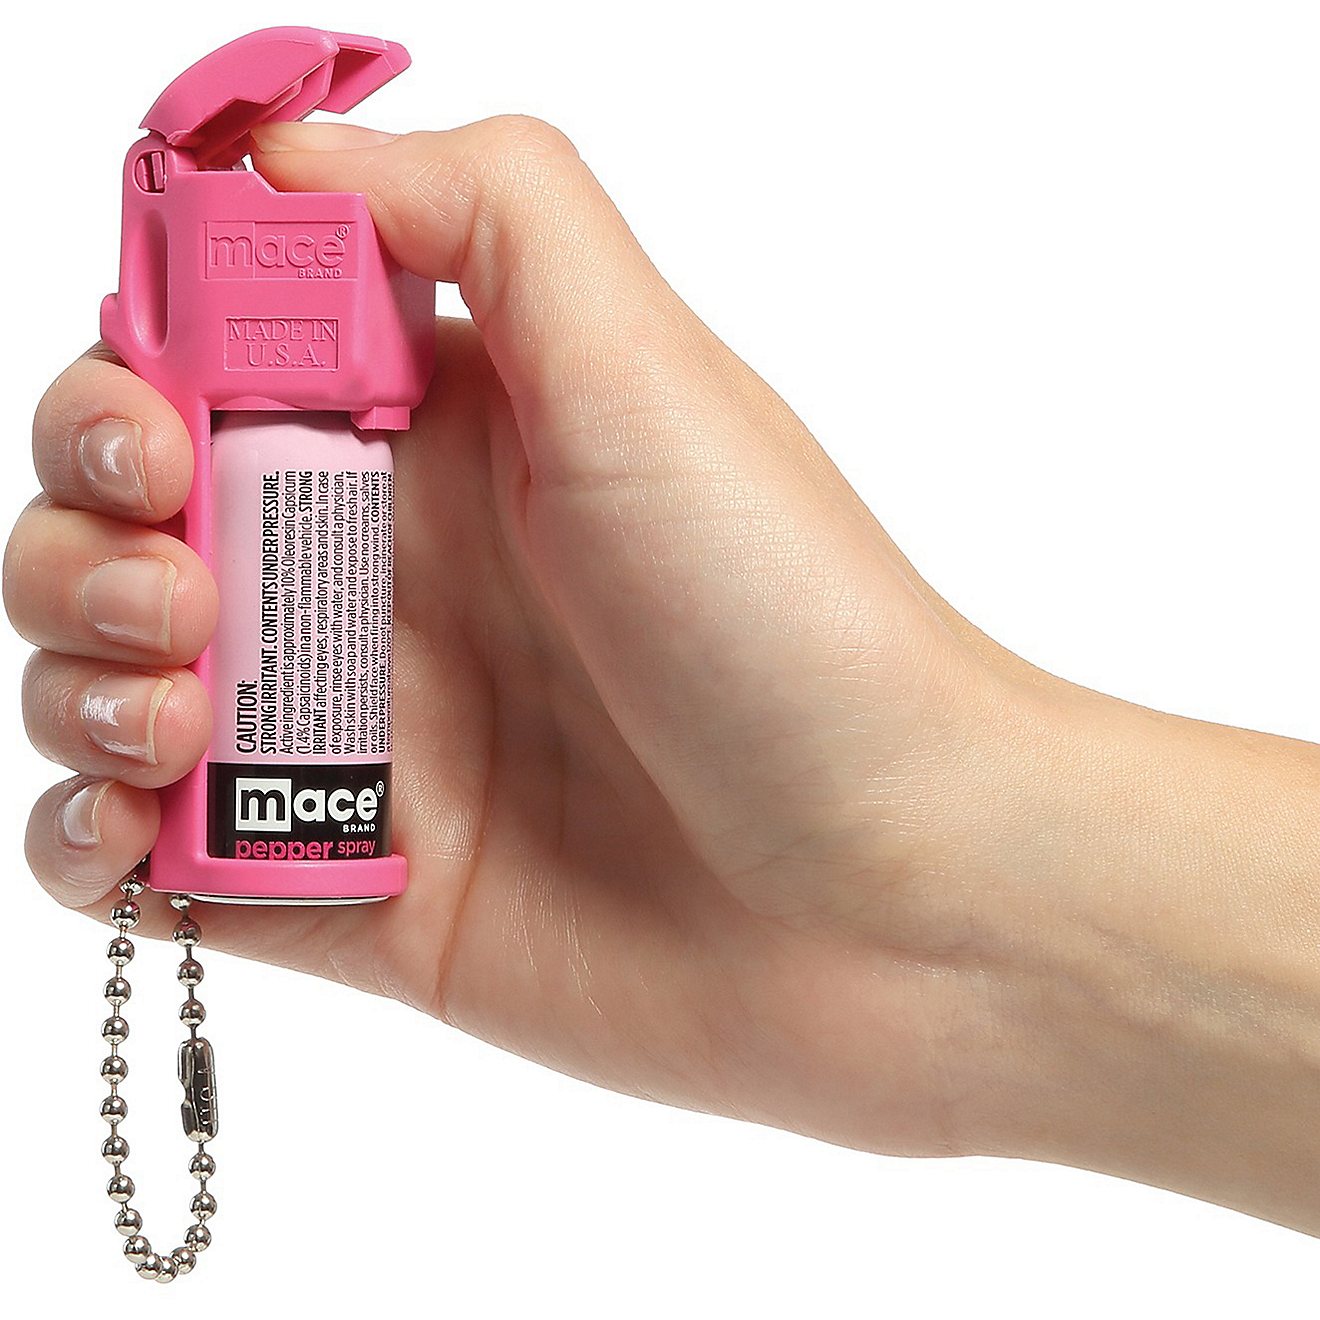 Mace Pocket Pepper Spray                                                                                                         - view number 4